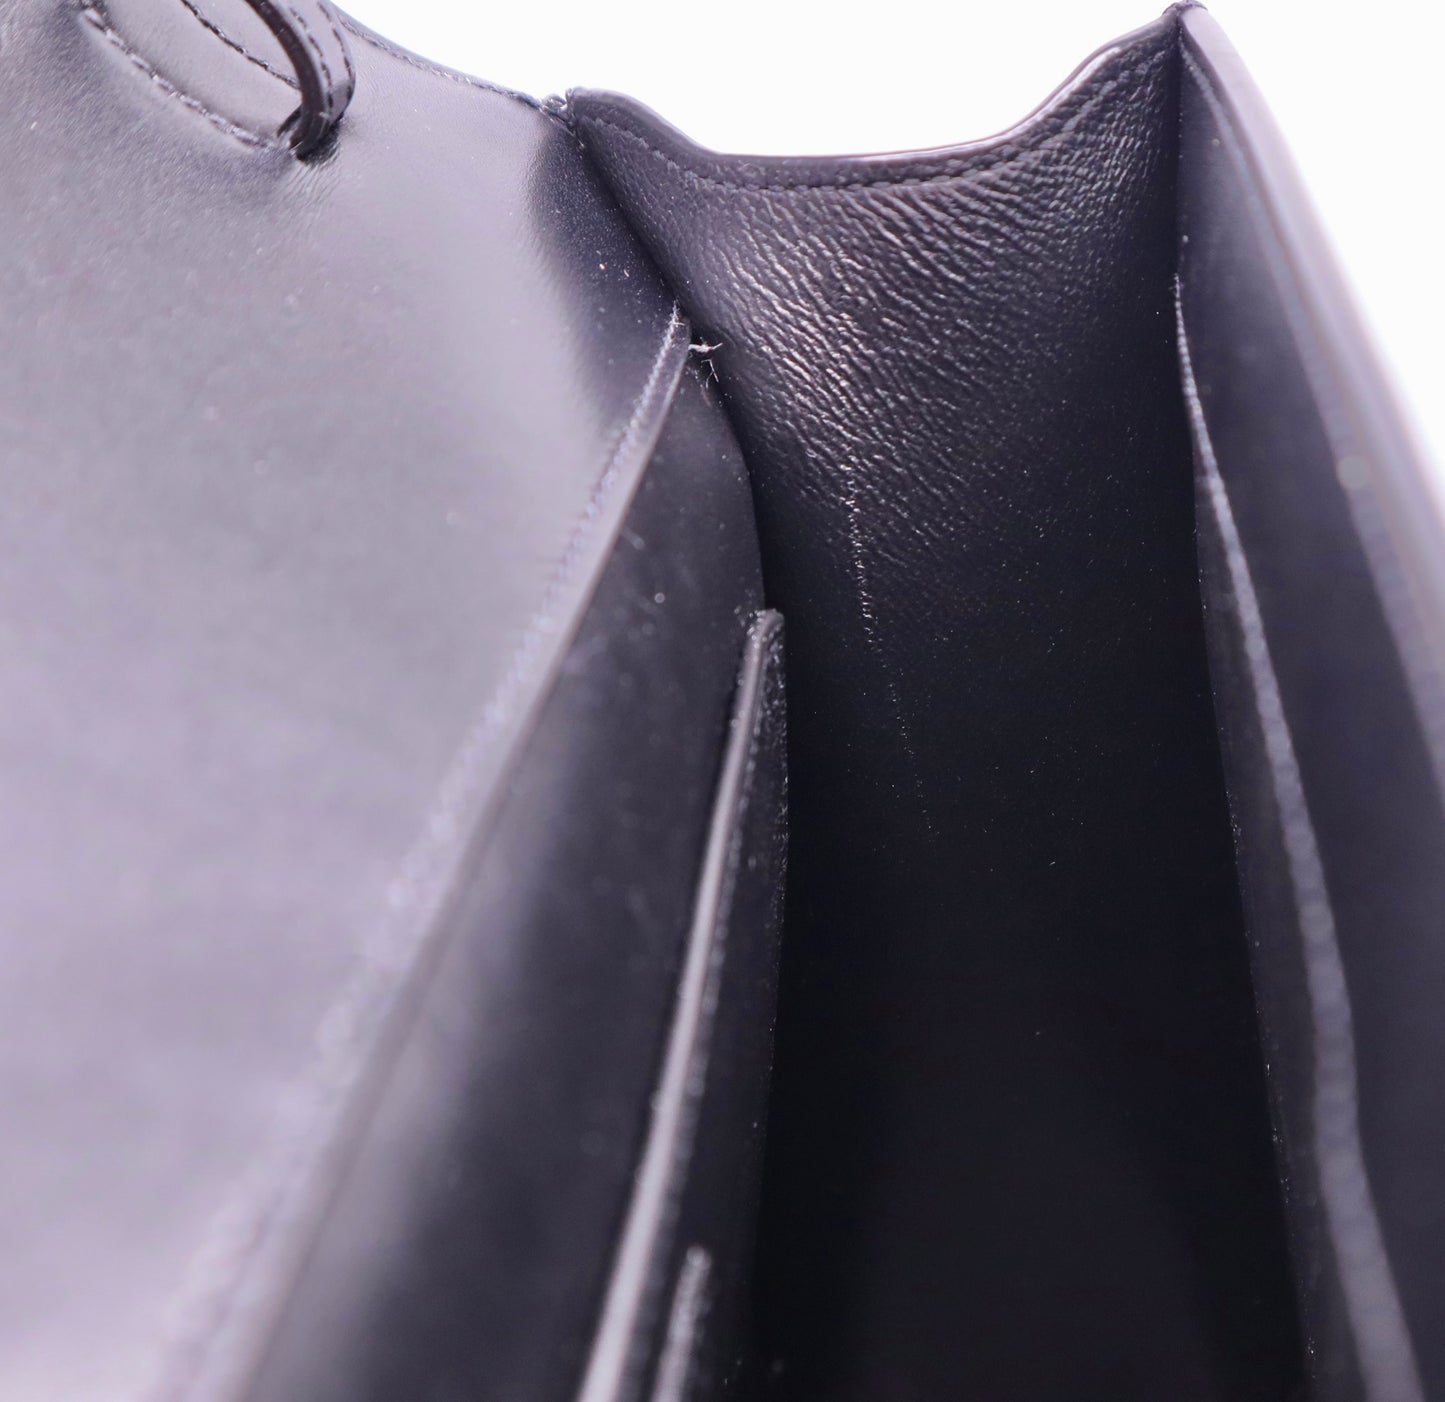 Inside, side of black bag with scuff mark on side 